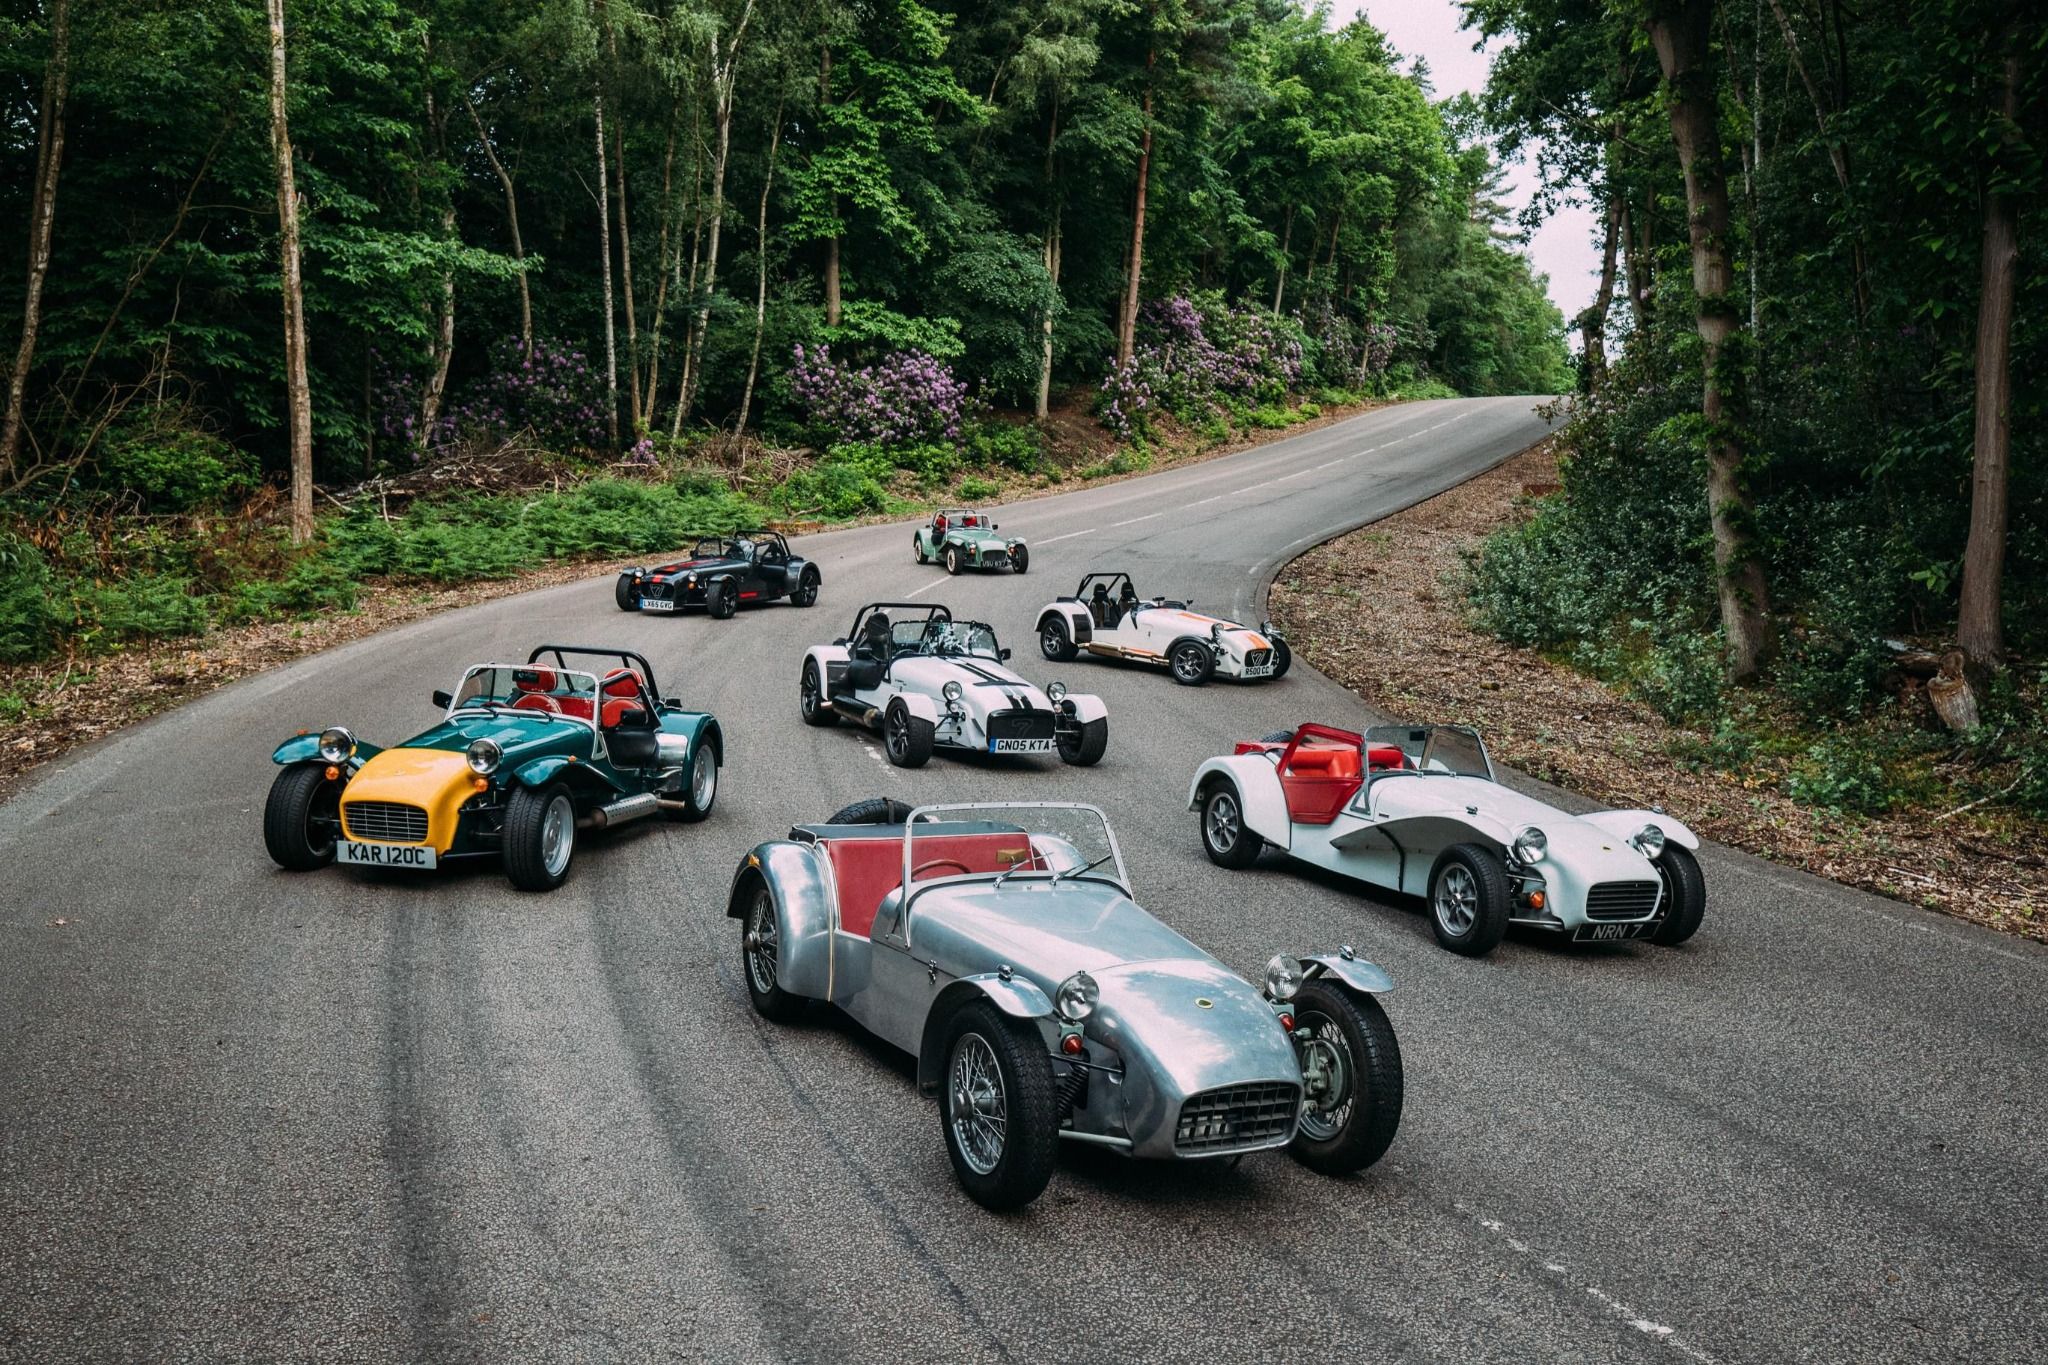 Caterham vehicles parked on a road